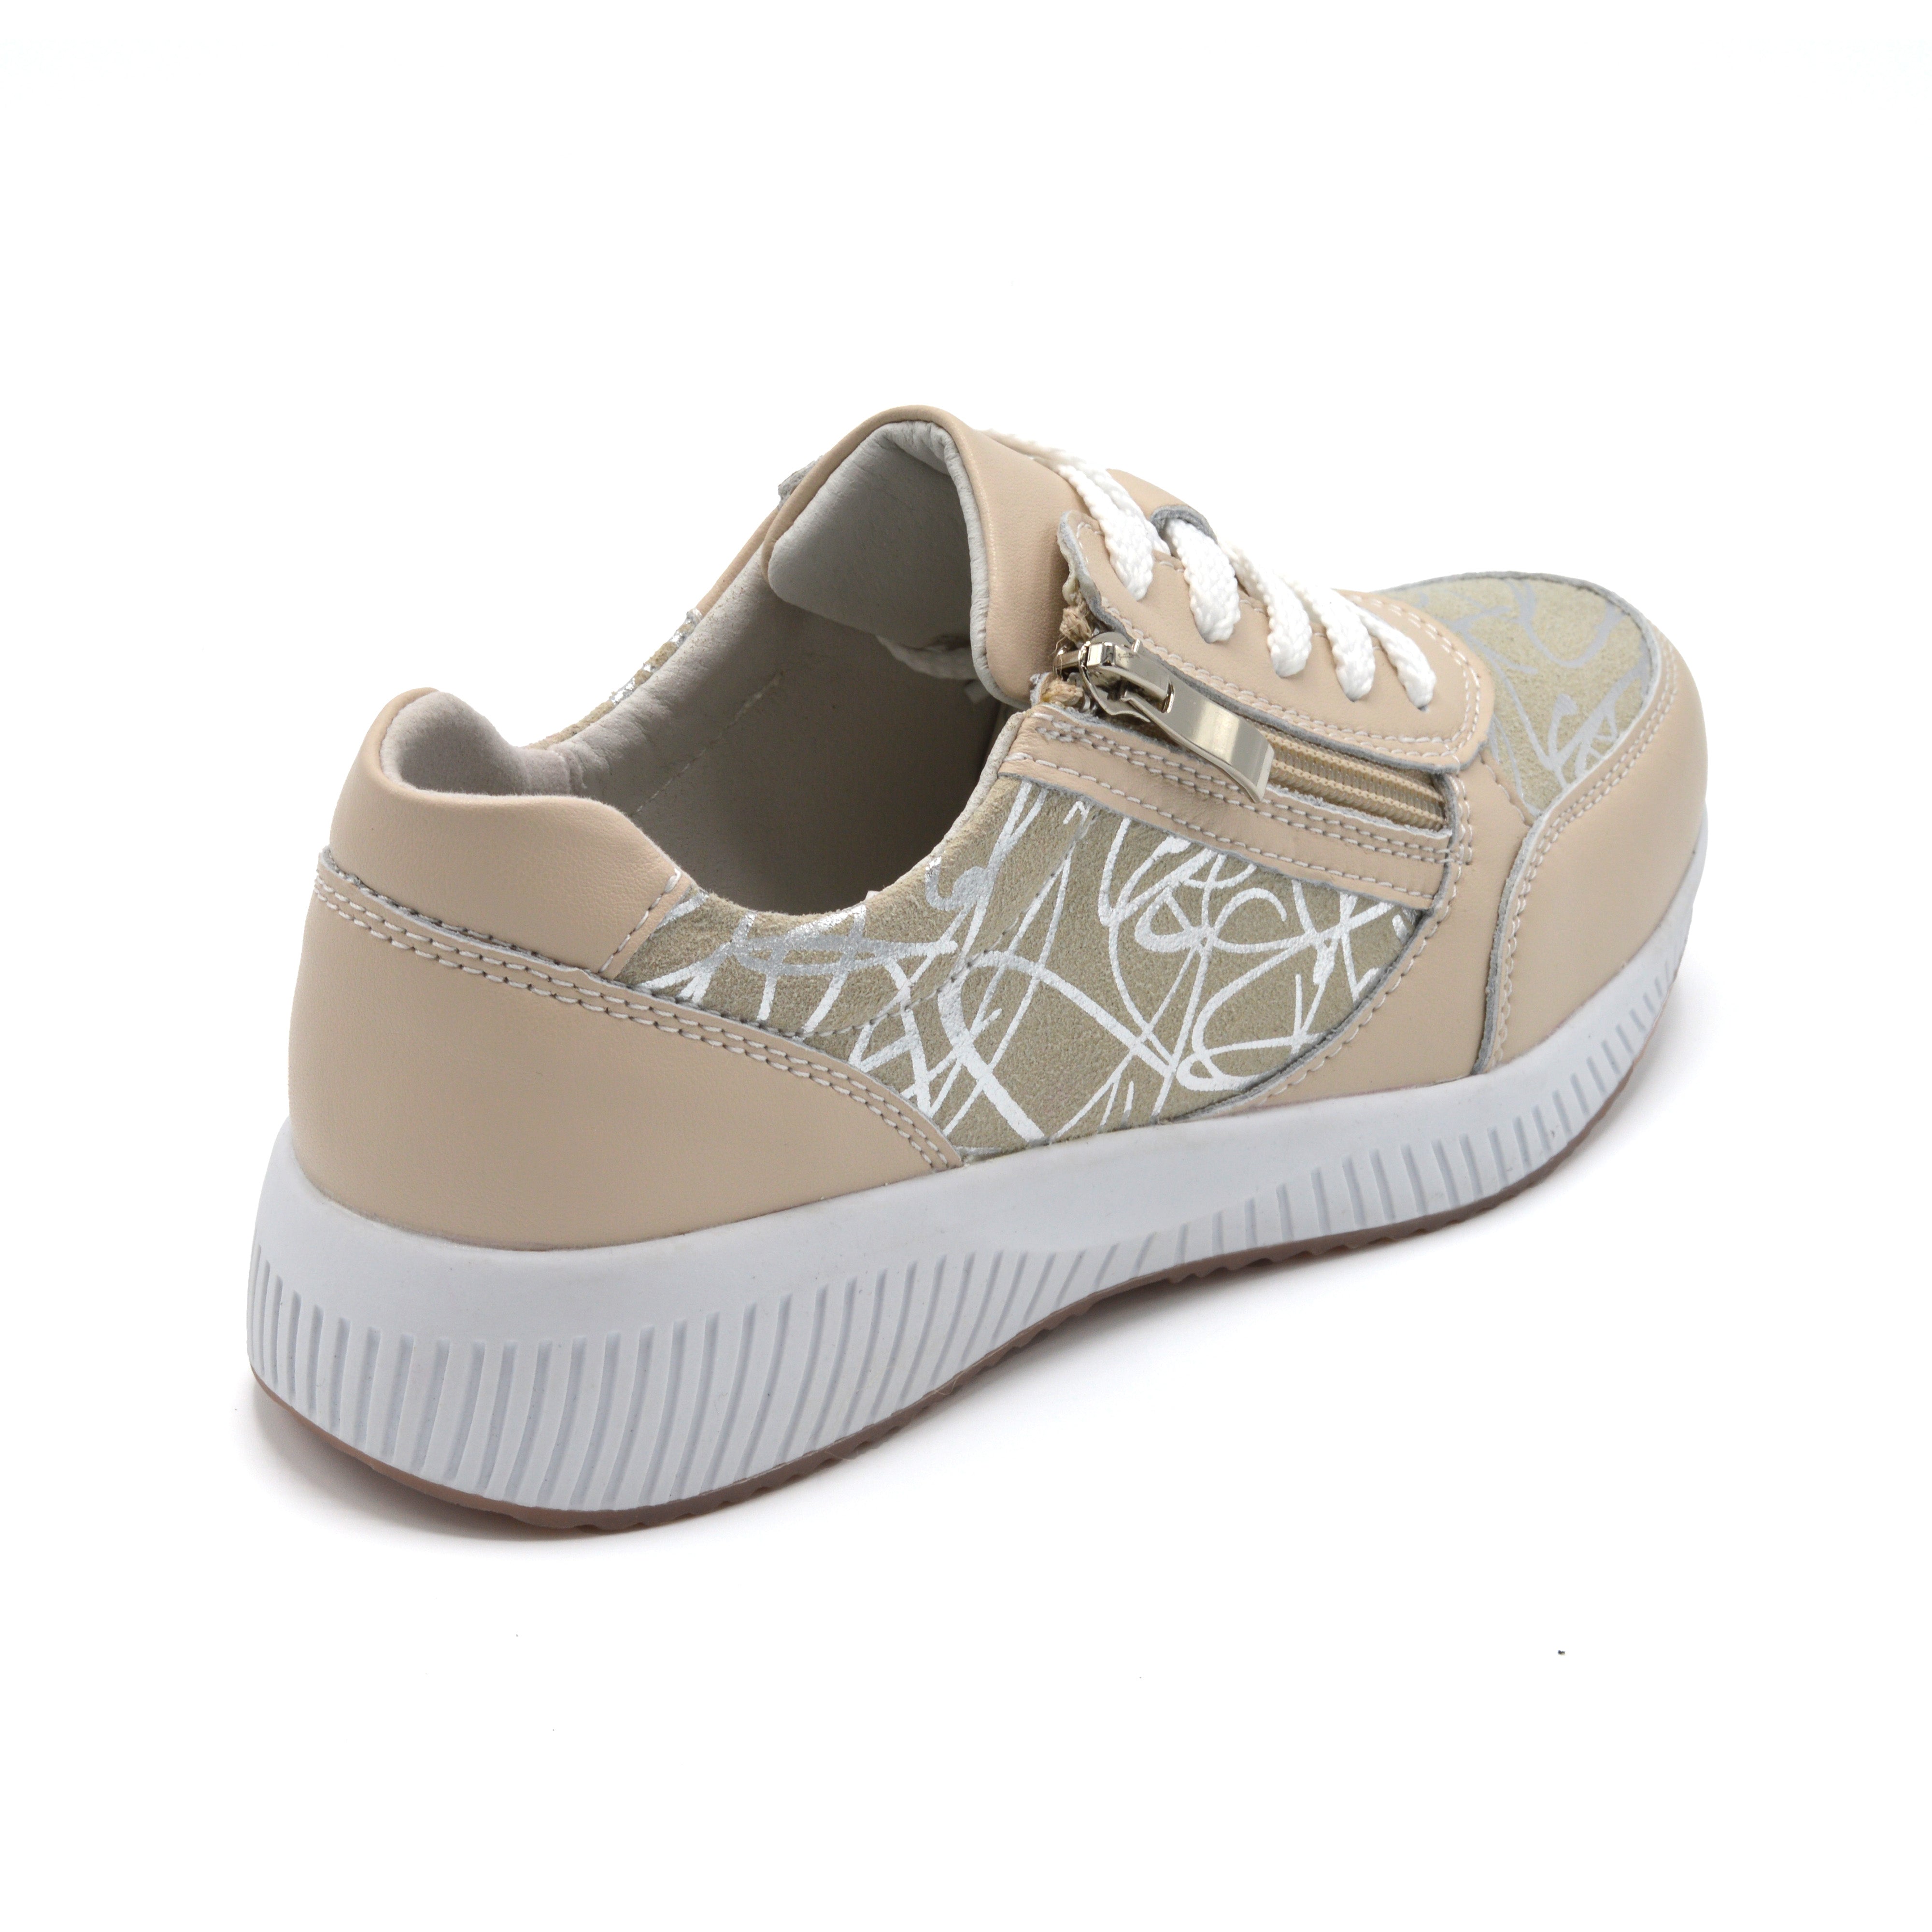 Wide Fitting Casual Zipped Trainer For Bunions